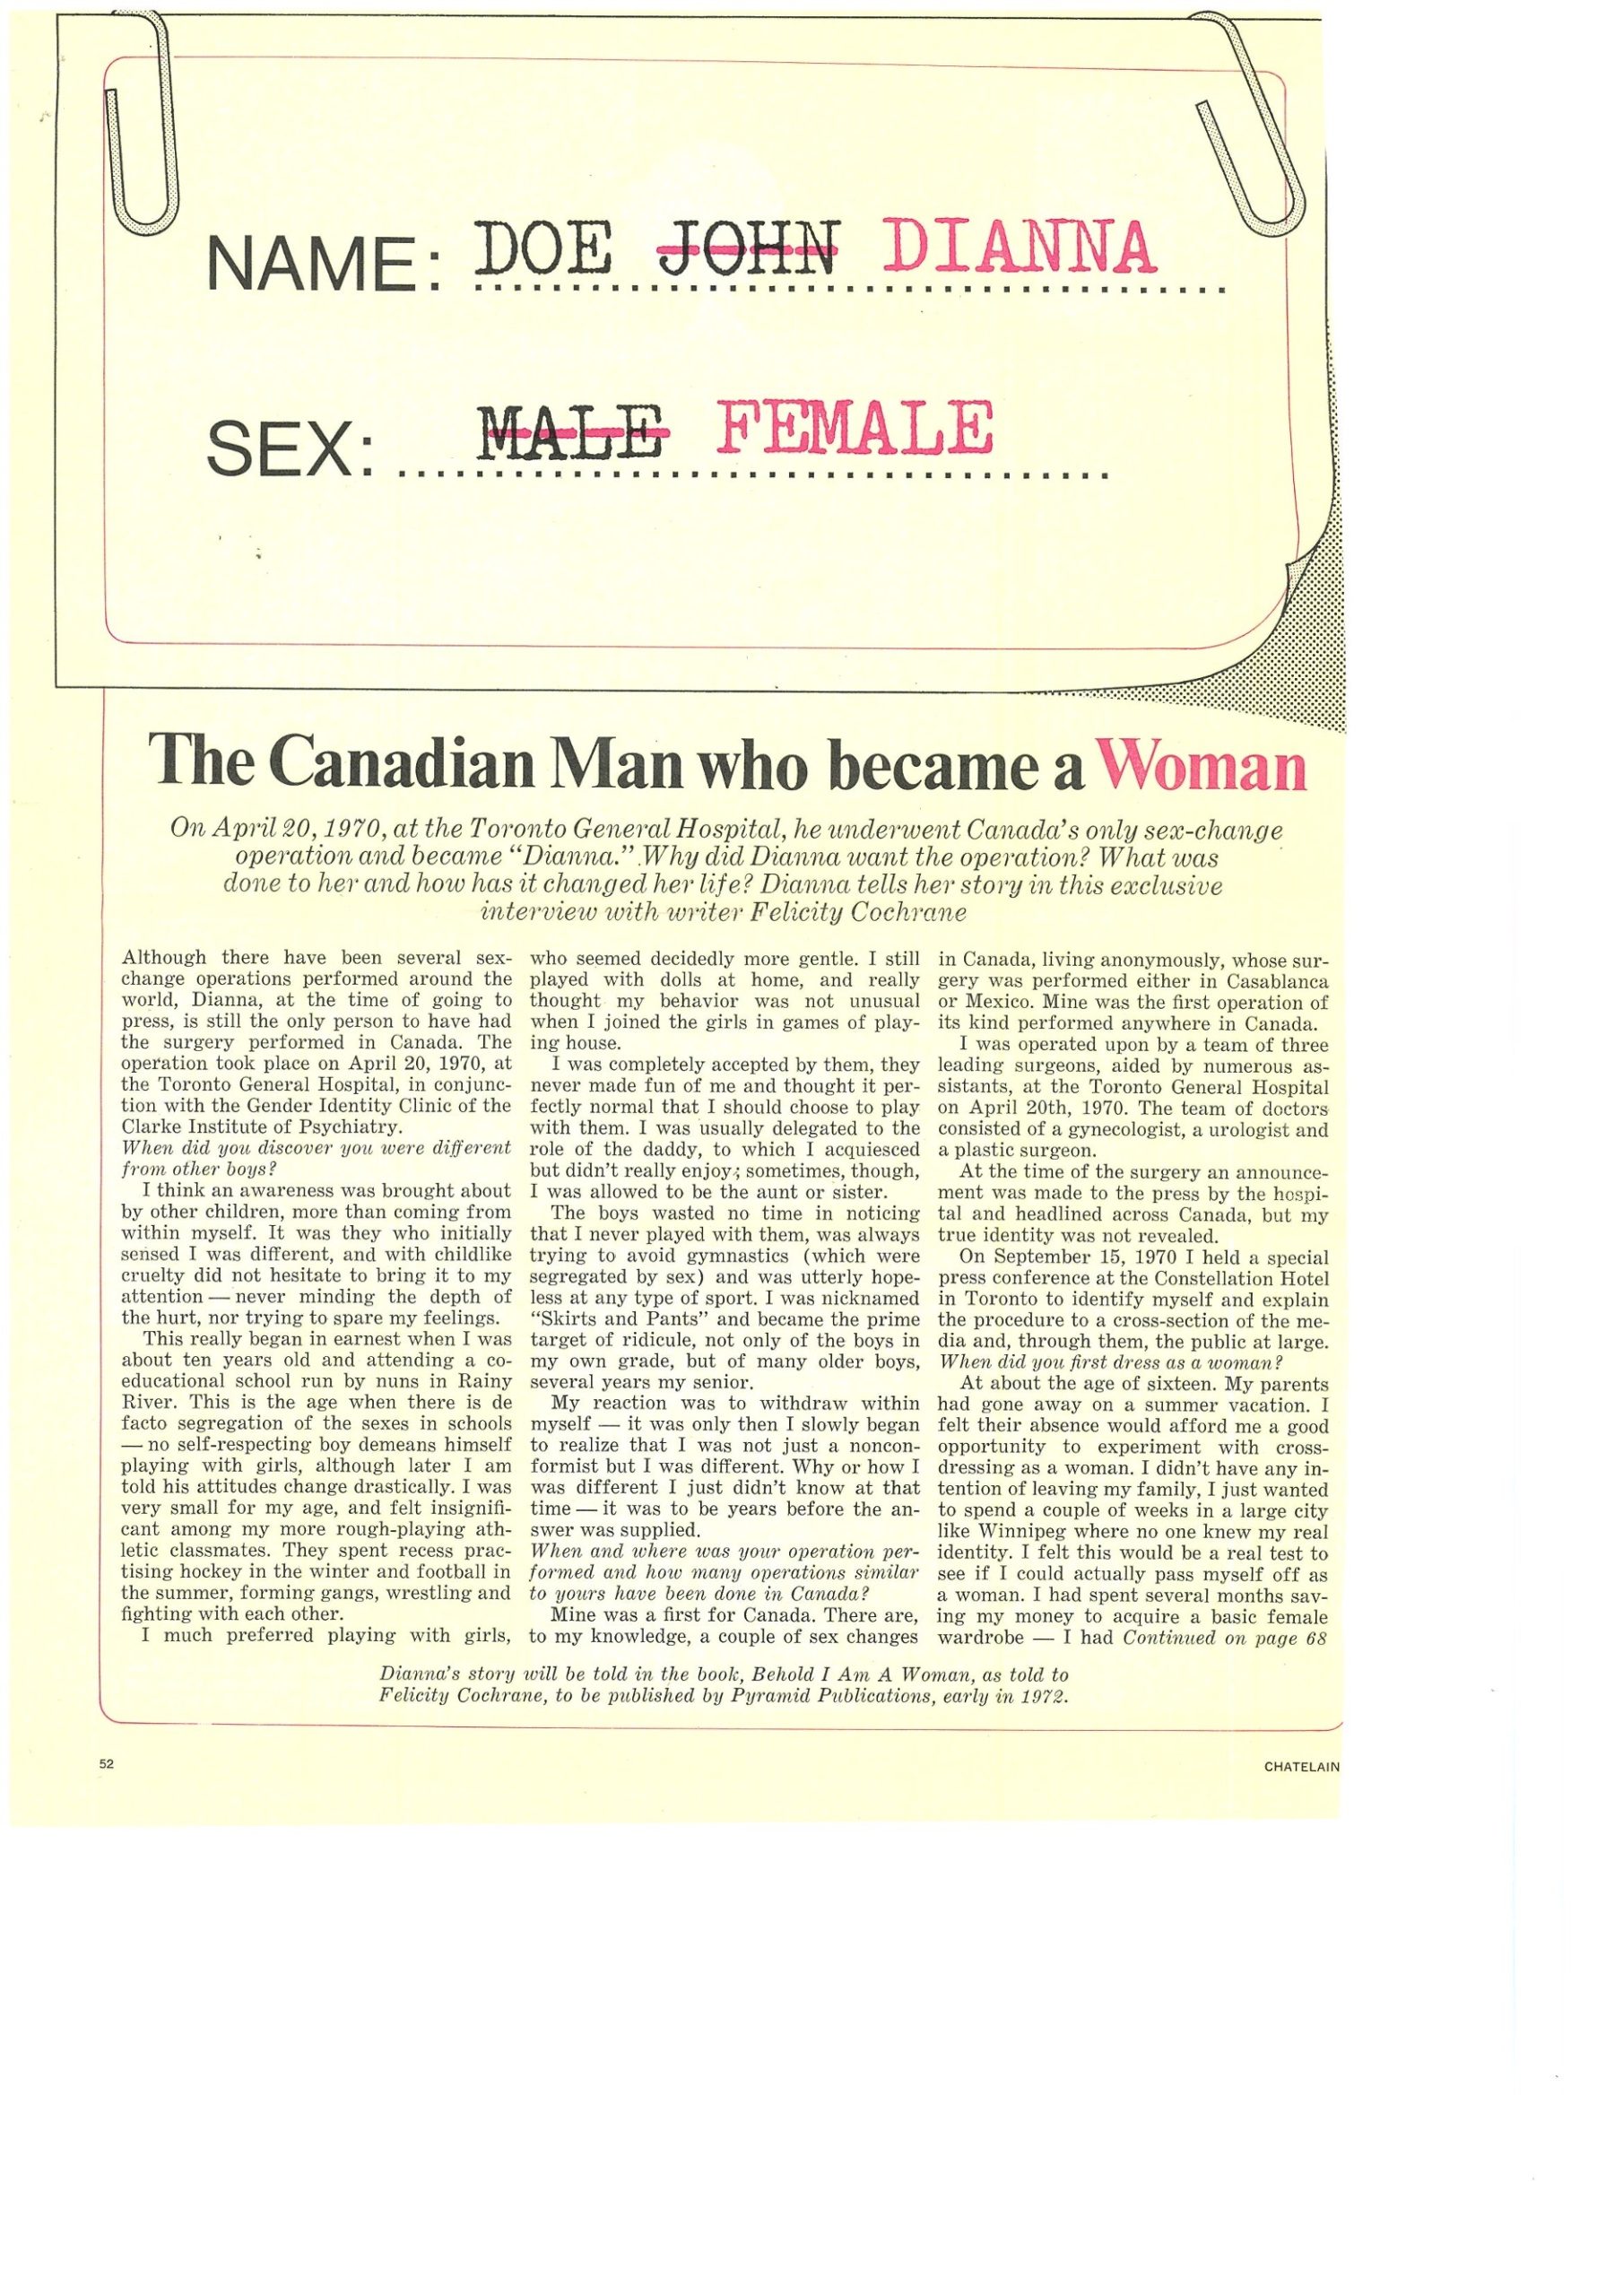 Page from a magazine. At the top of the page, there is an illustration of a piece of notepaper with two paper clips and the text, “NAME: DOE JOHN DIANNA / SEX: MALE FEMALE.”